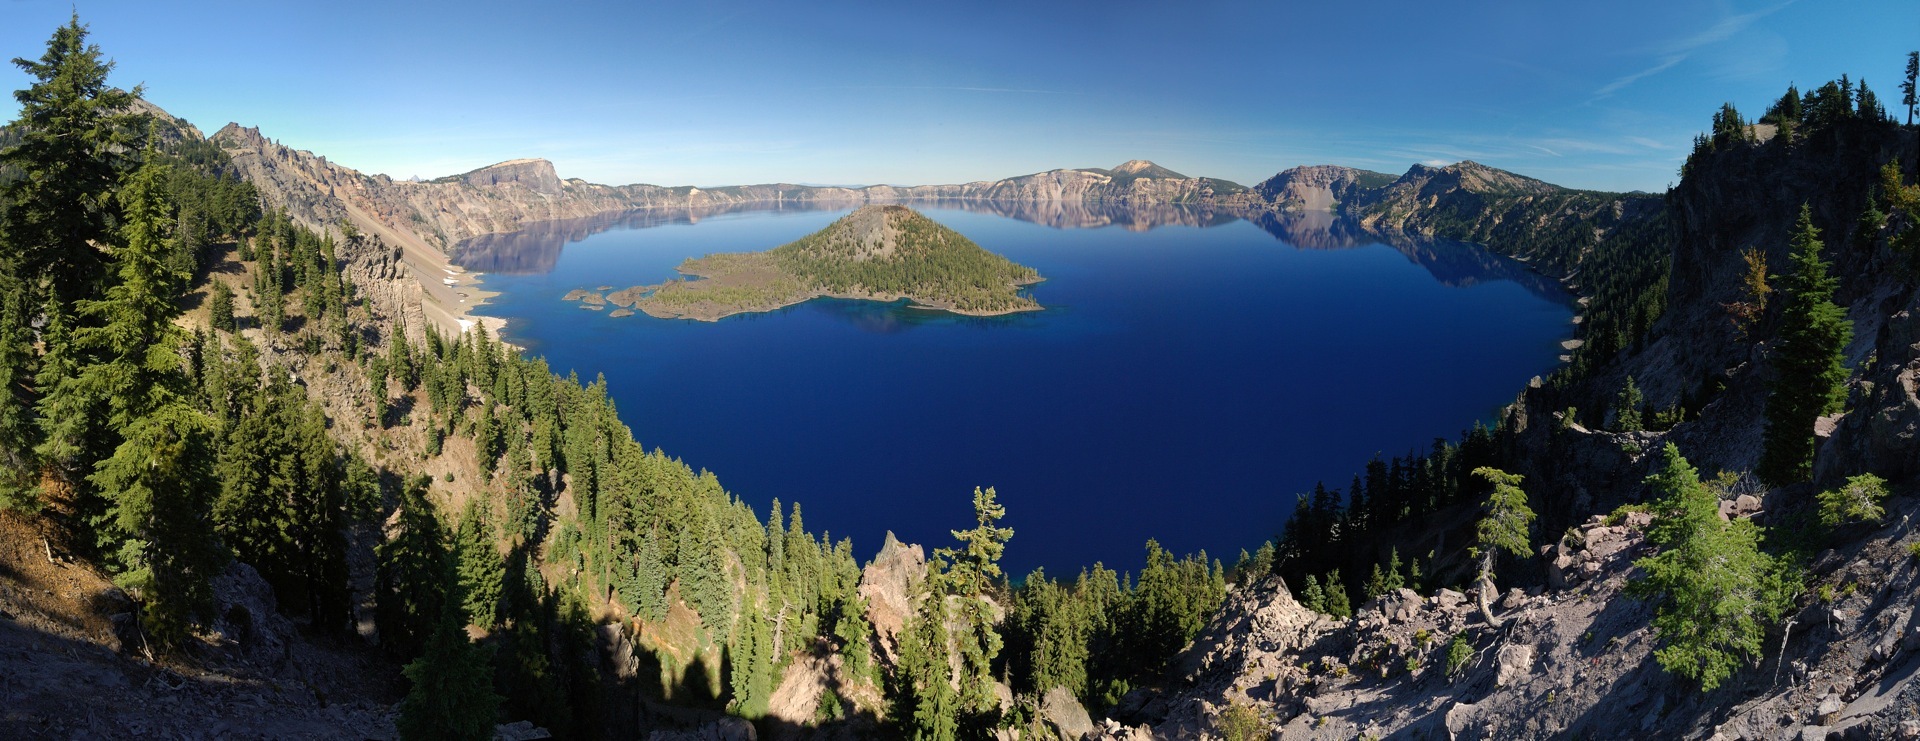 Becca Curram Crater Lake National Park High Quality Wallpaper